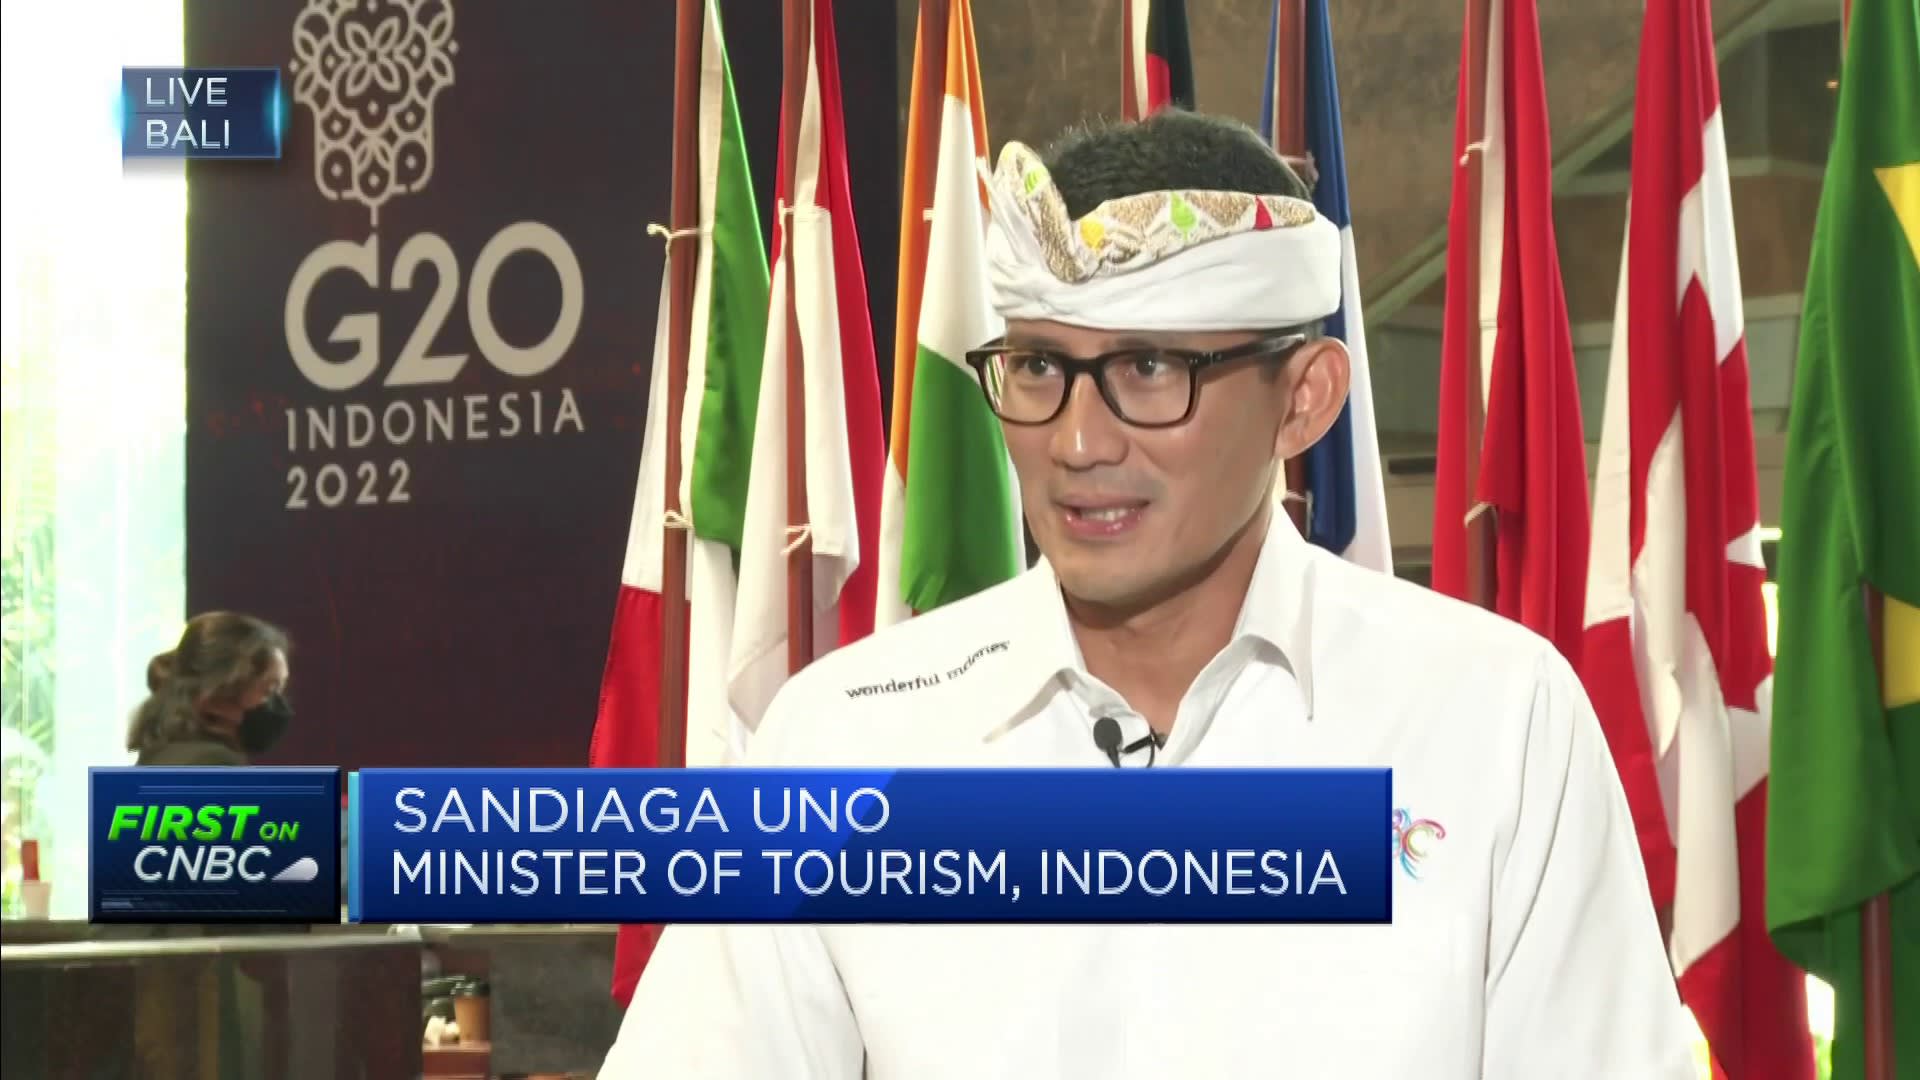 International vacationer arrivals will not return to pre-Covid ranges till 2025, says Indonesian minister